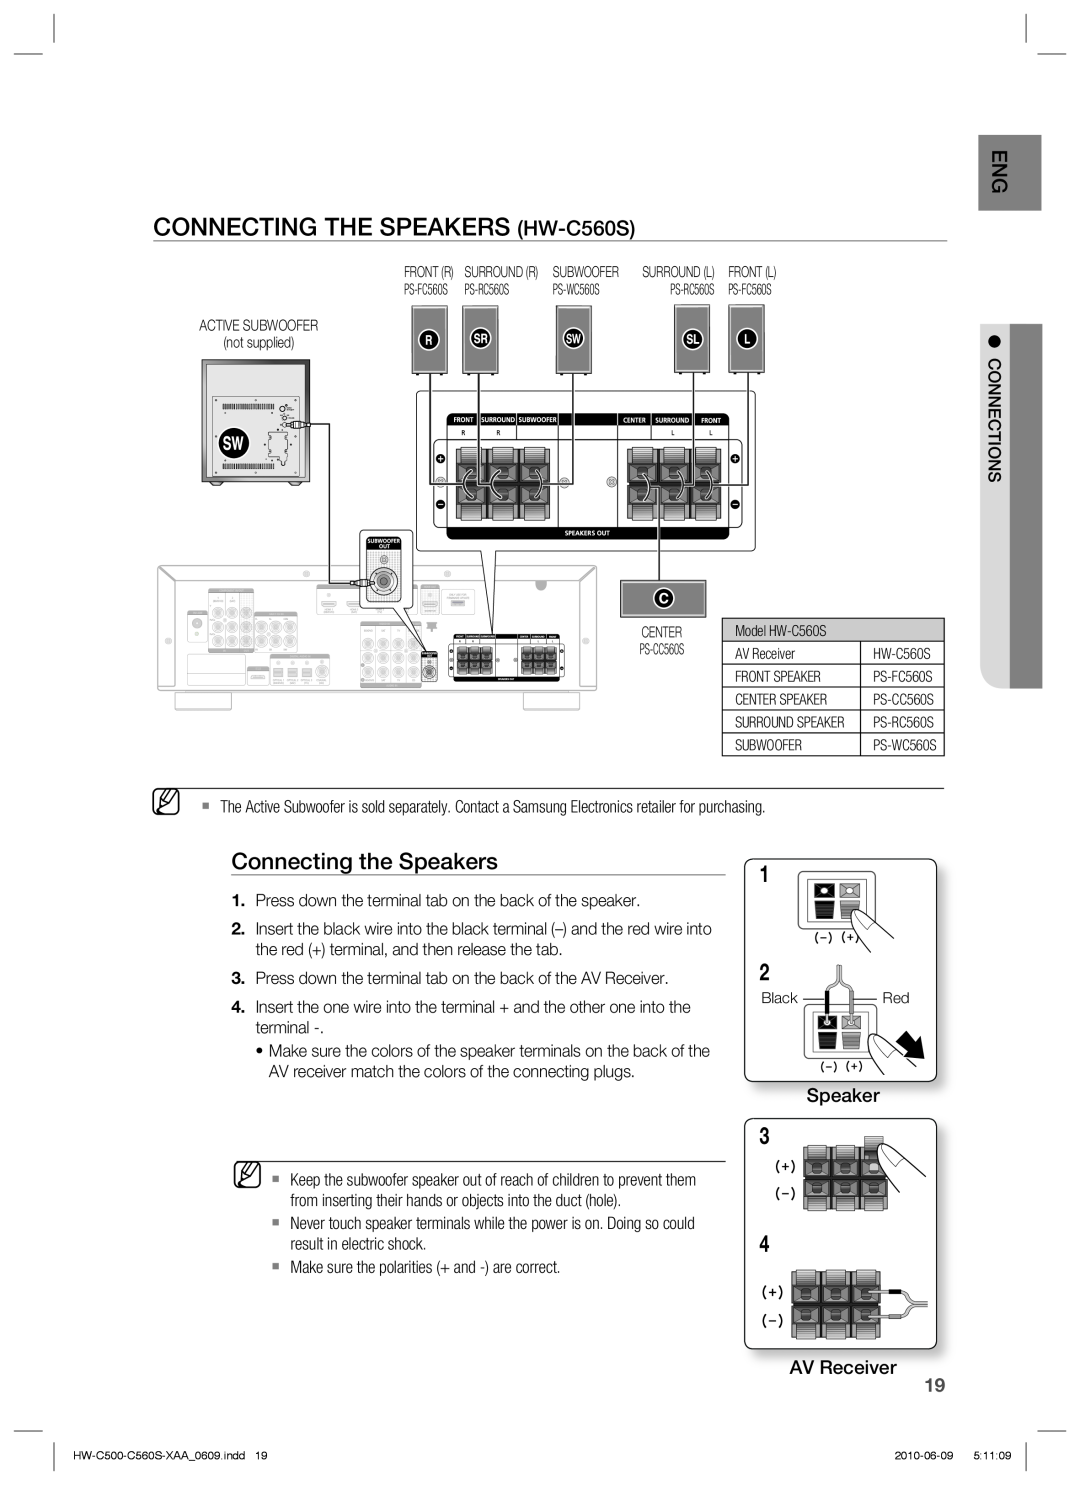 Samsung HW-C500 user manual CONNECTING THE SPEAKERS HW-C560S, Connecting the Speakers, AV Receiver 